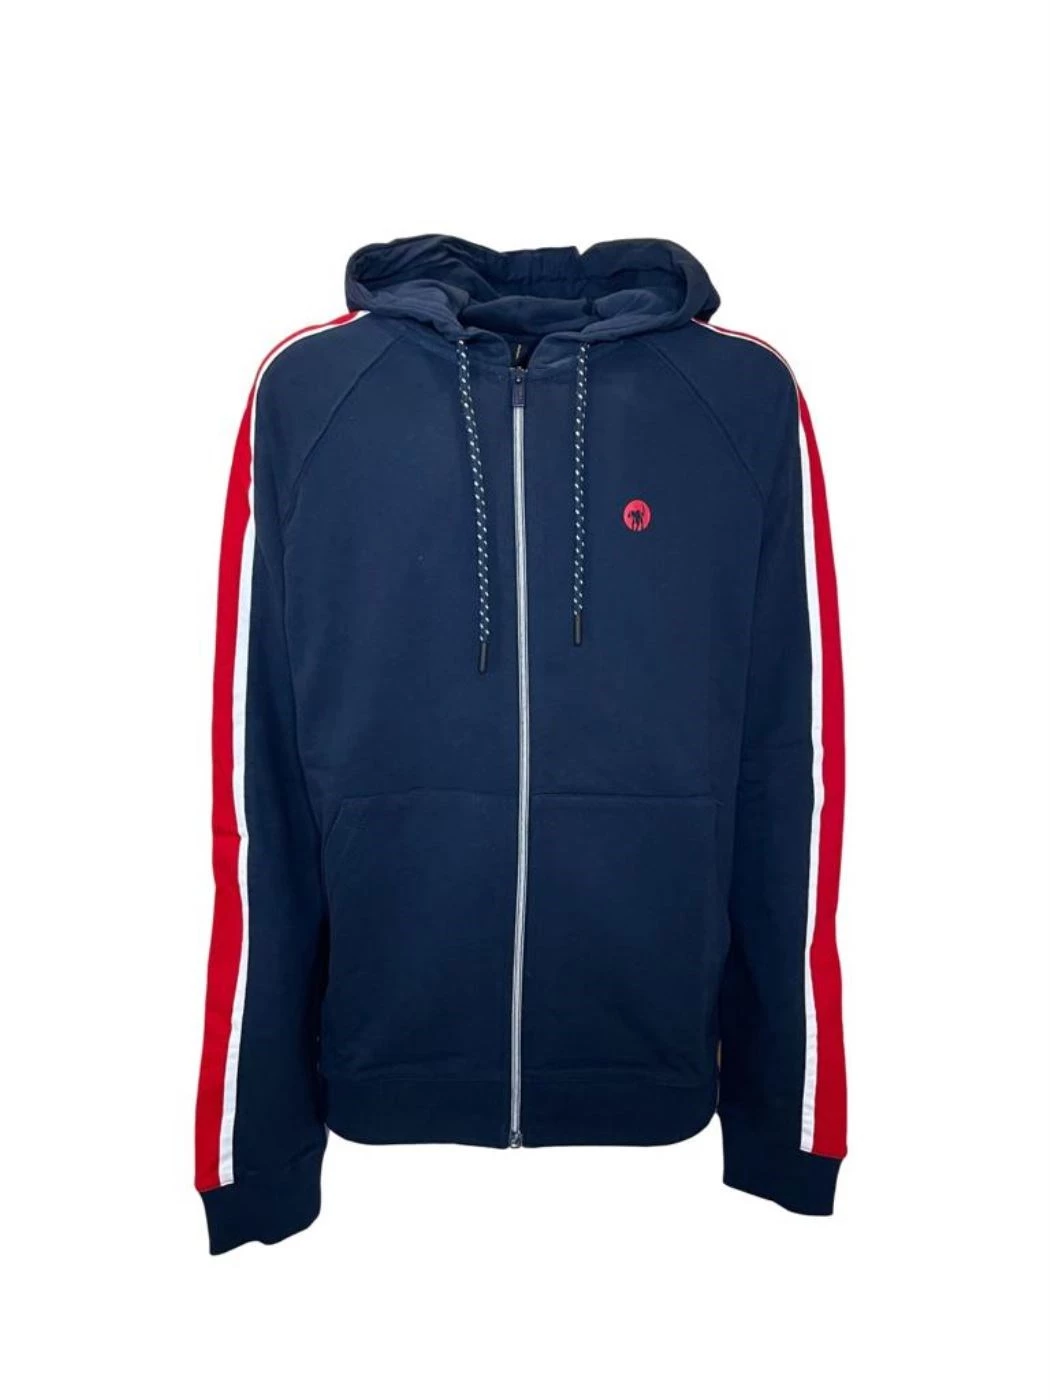 Central opening sweatshirt with zip and hood